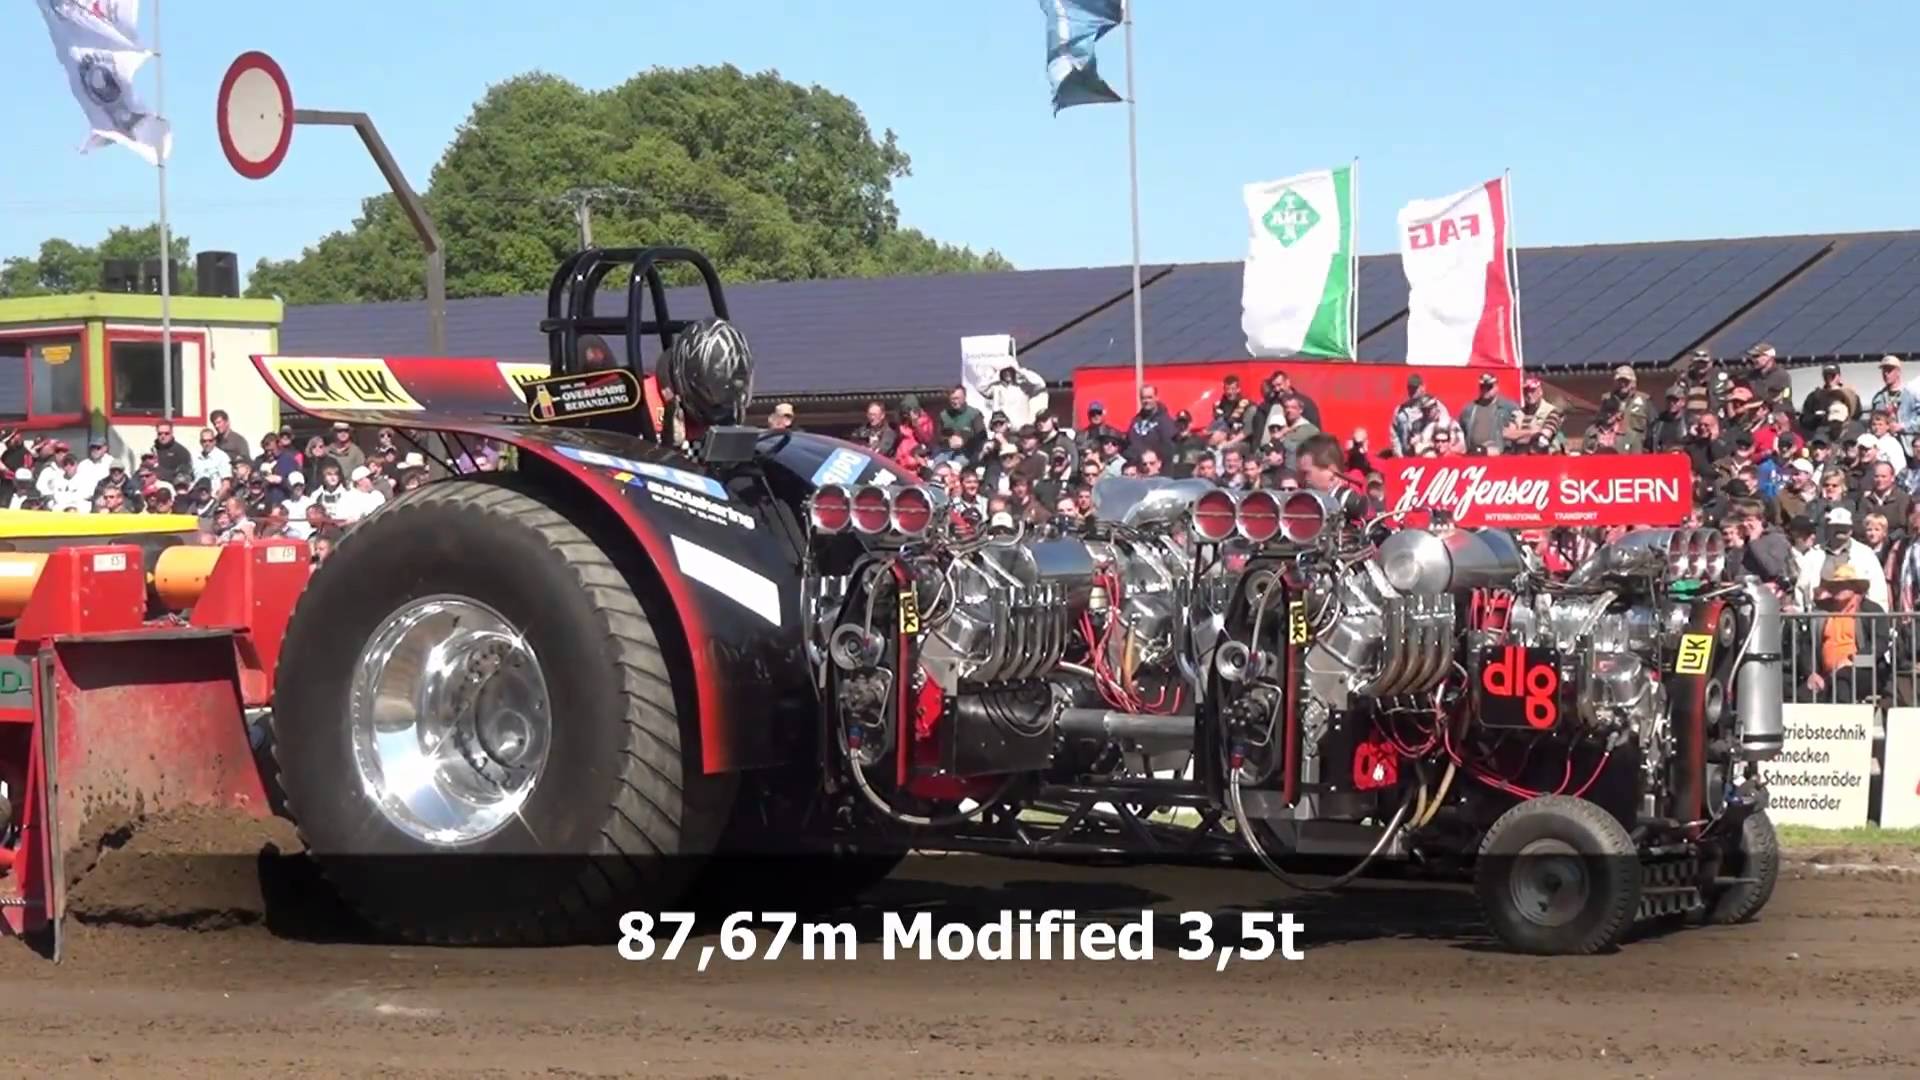 TRACTOR PULLING race racing hot rod rods tractor engine h wallpaper 1920x1080